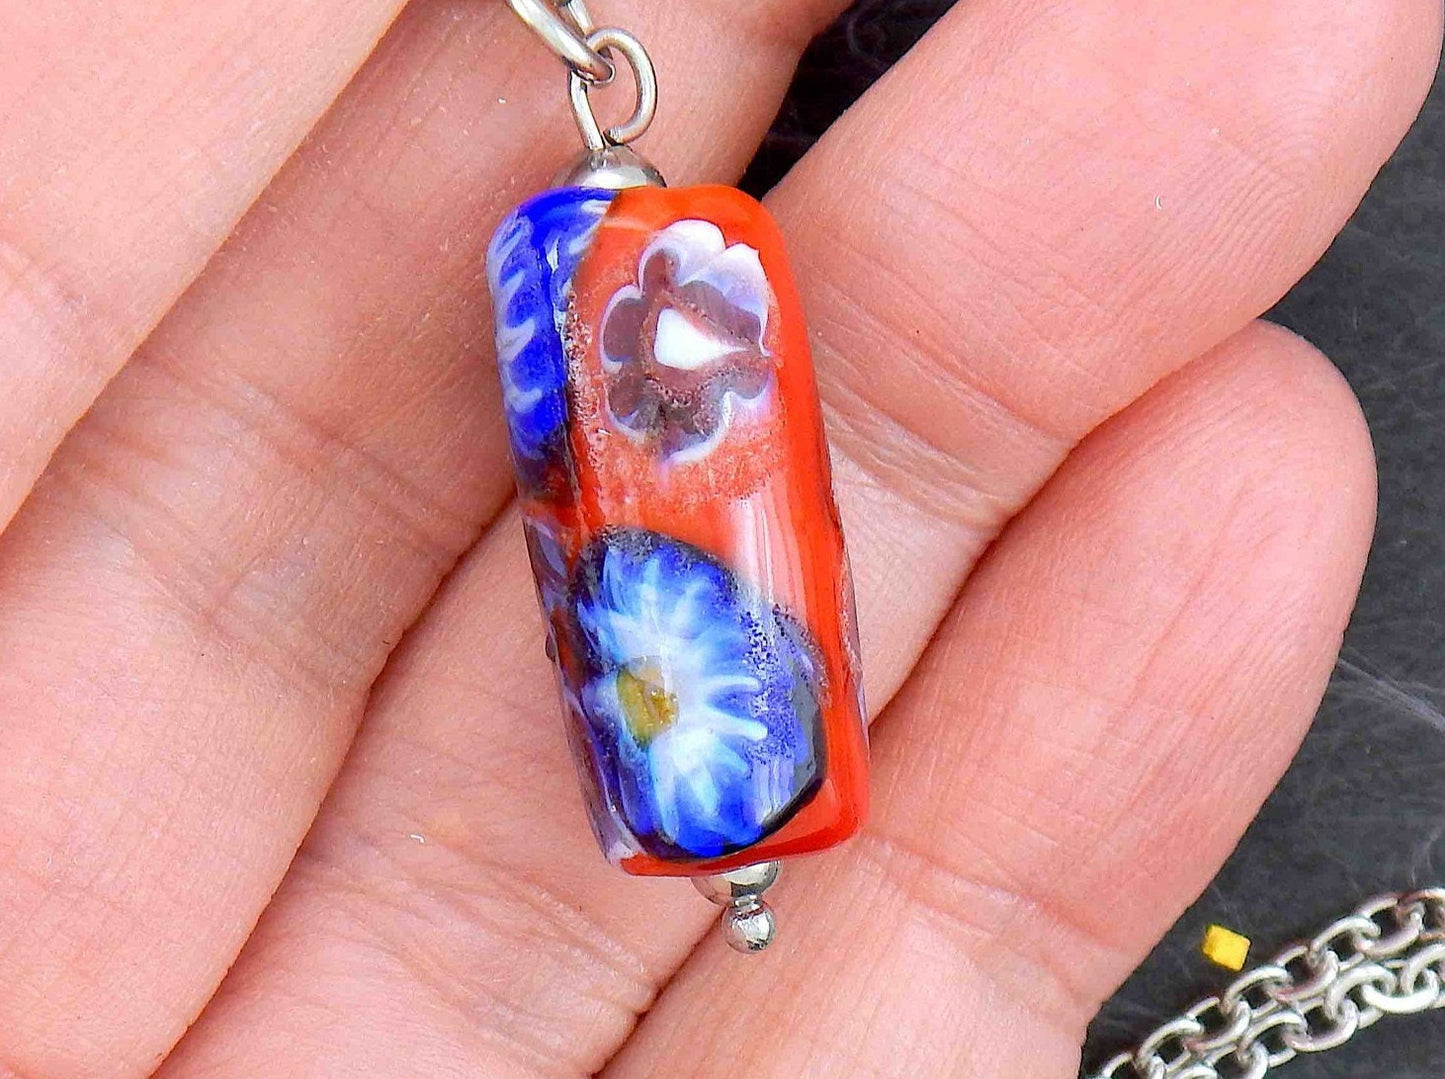 14-inch necklace with red glass cylinder and blue flower murines (Murano-style glass handmade in Montreal), stainless steel chain